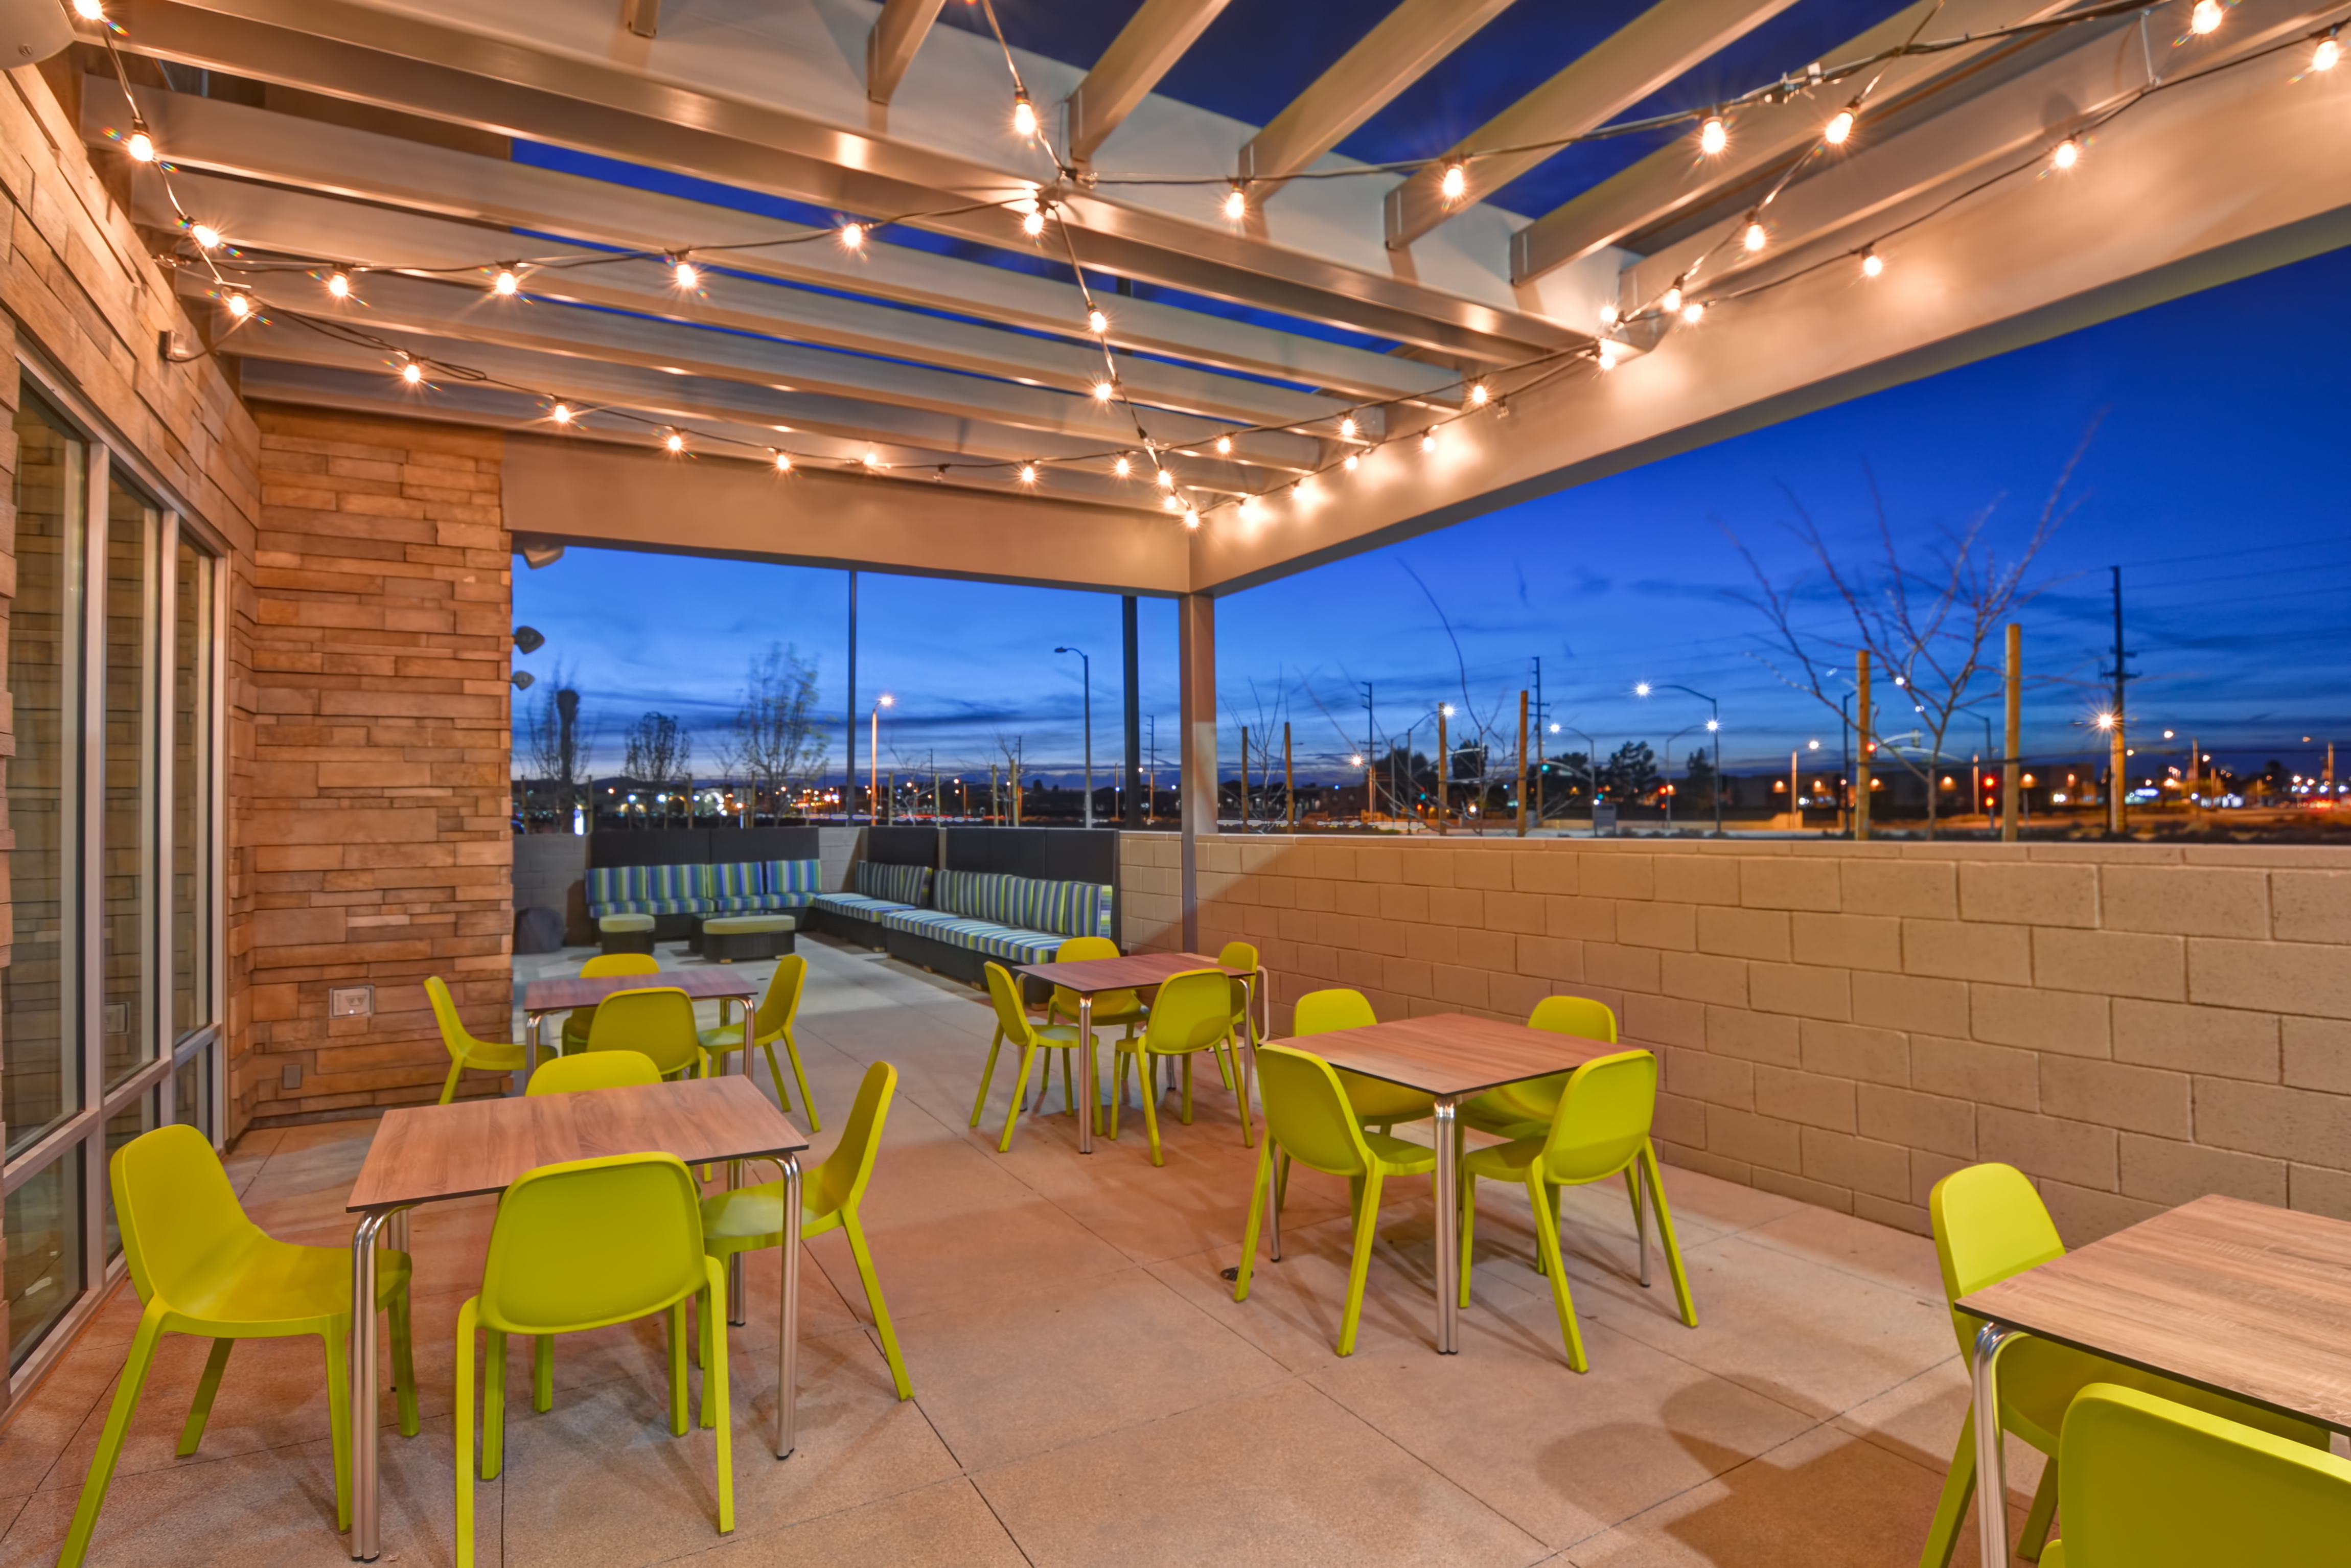 Outdoor Patio with Seating at Night